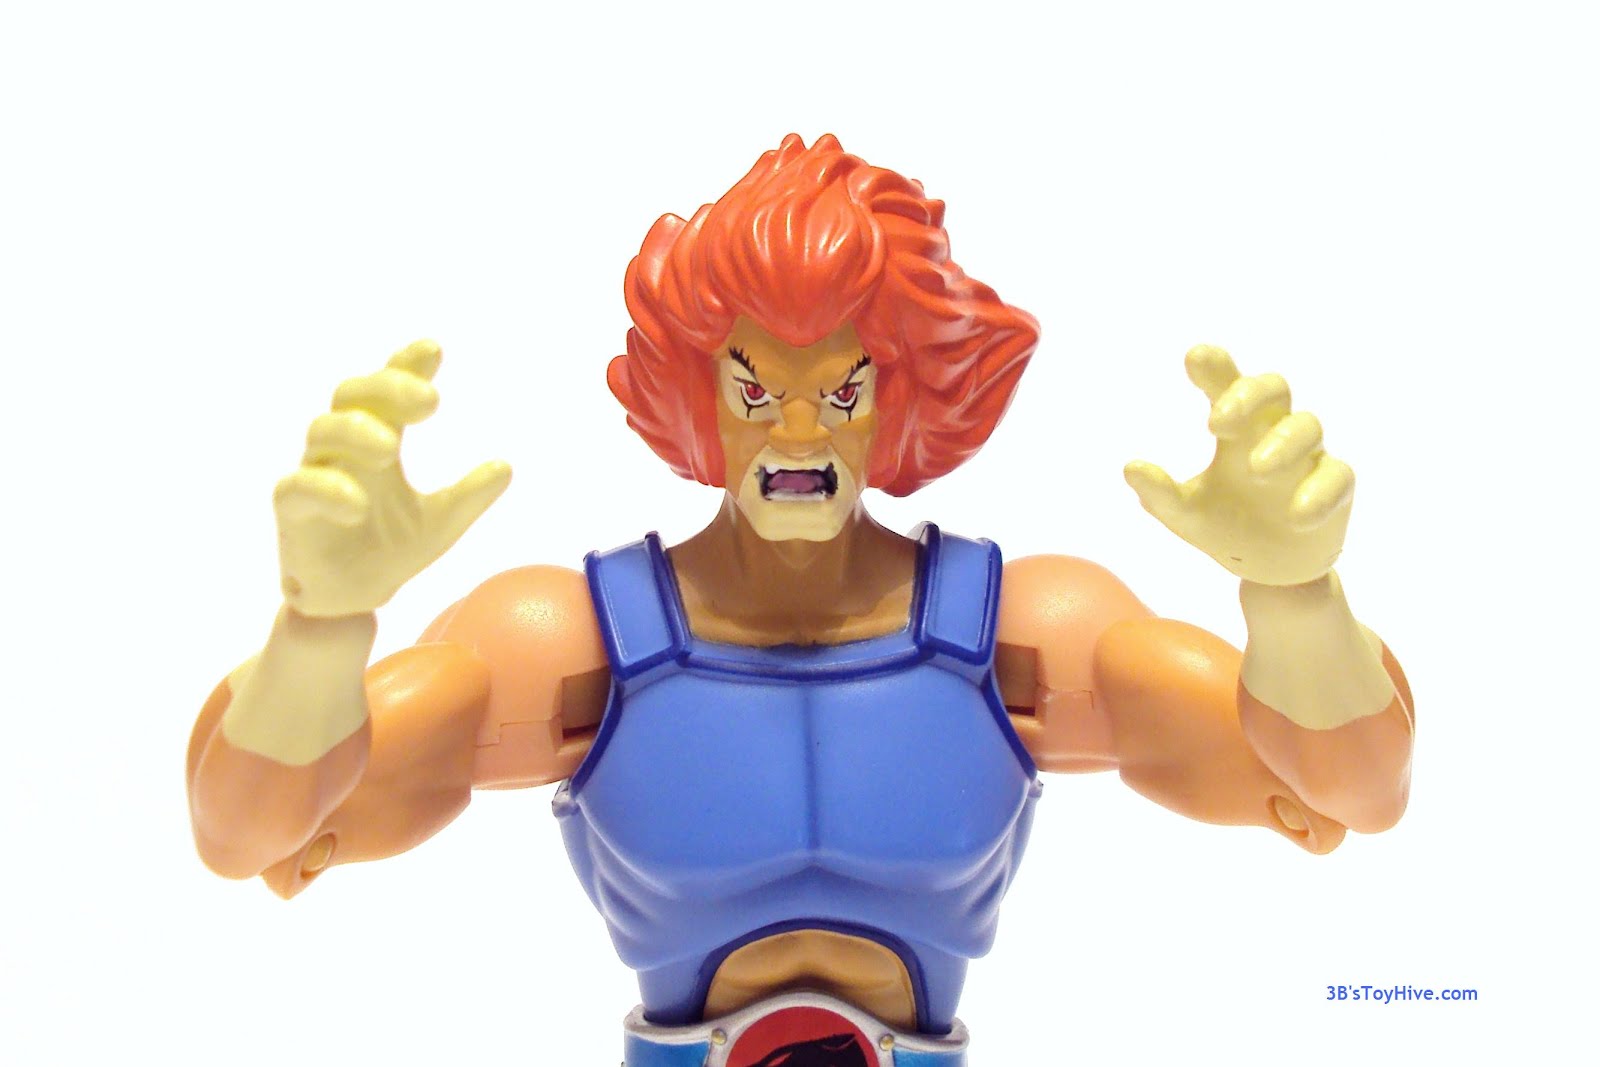 Bandai Thundercats Lion-O action Figure loose old 6" LOST A LITTLE COLOR